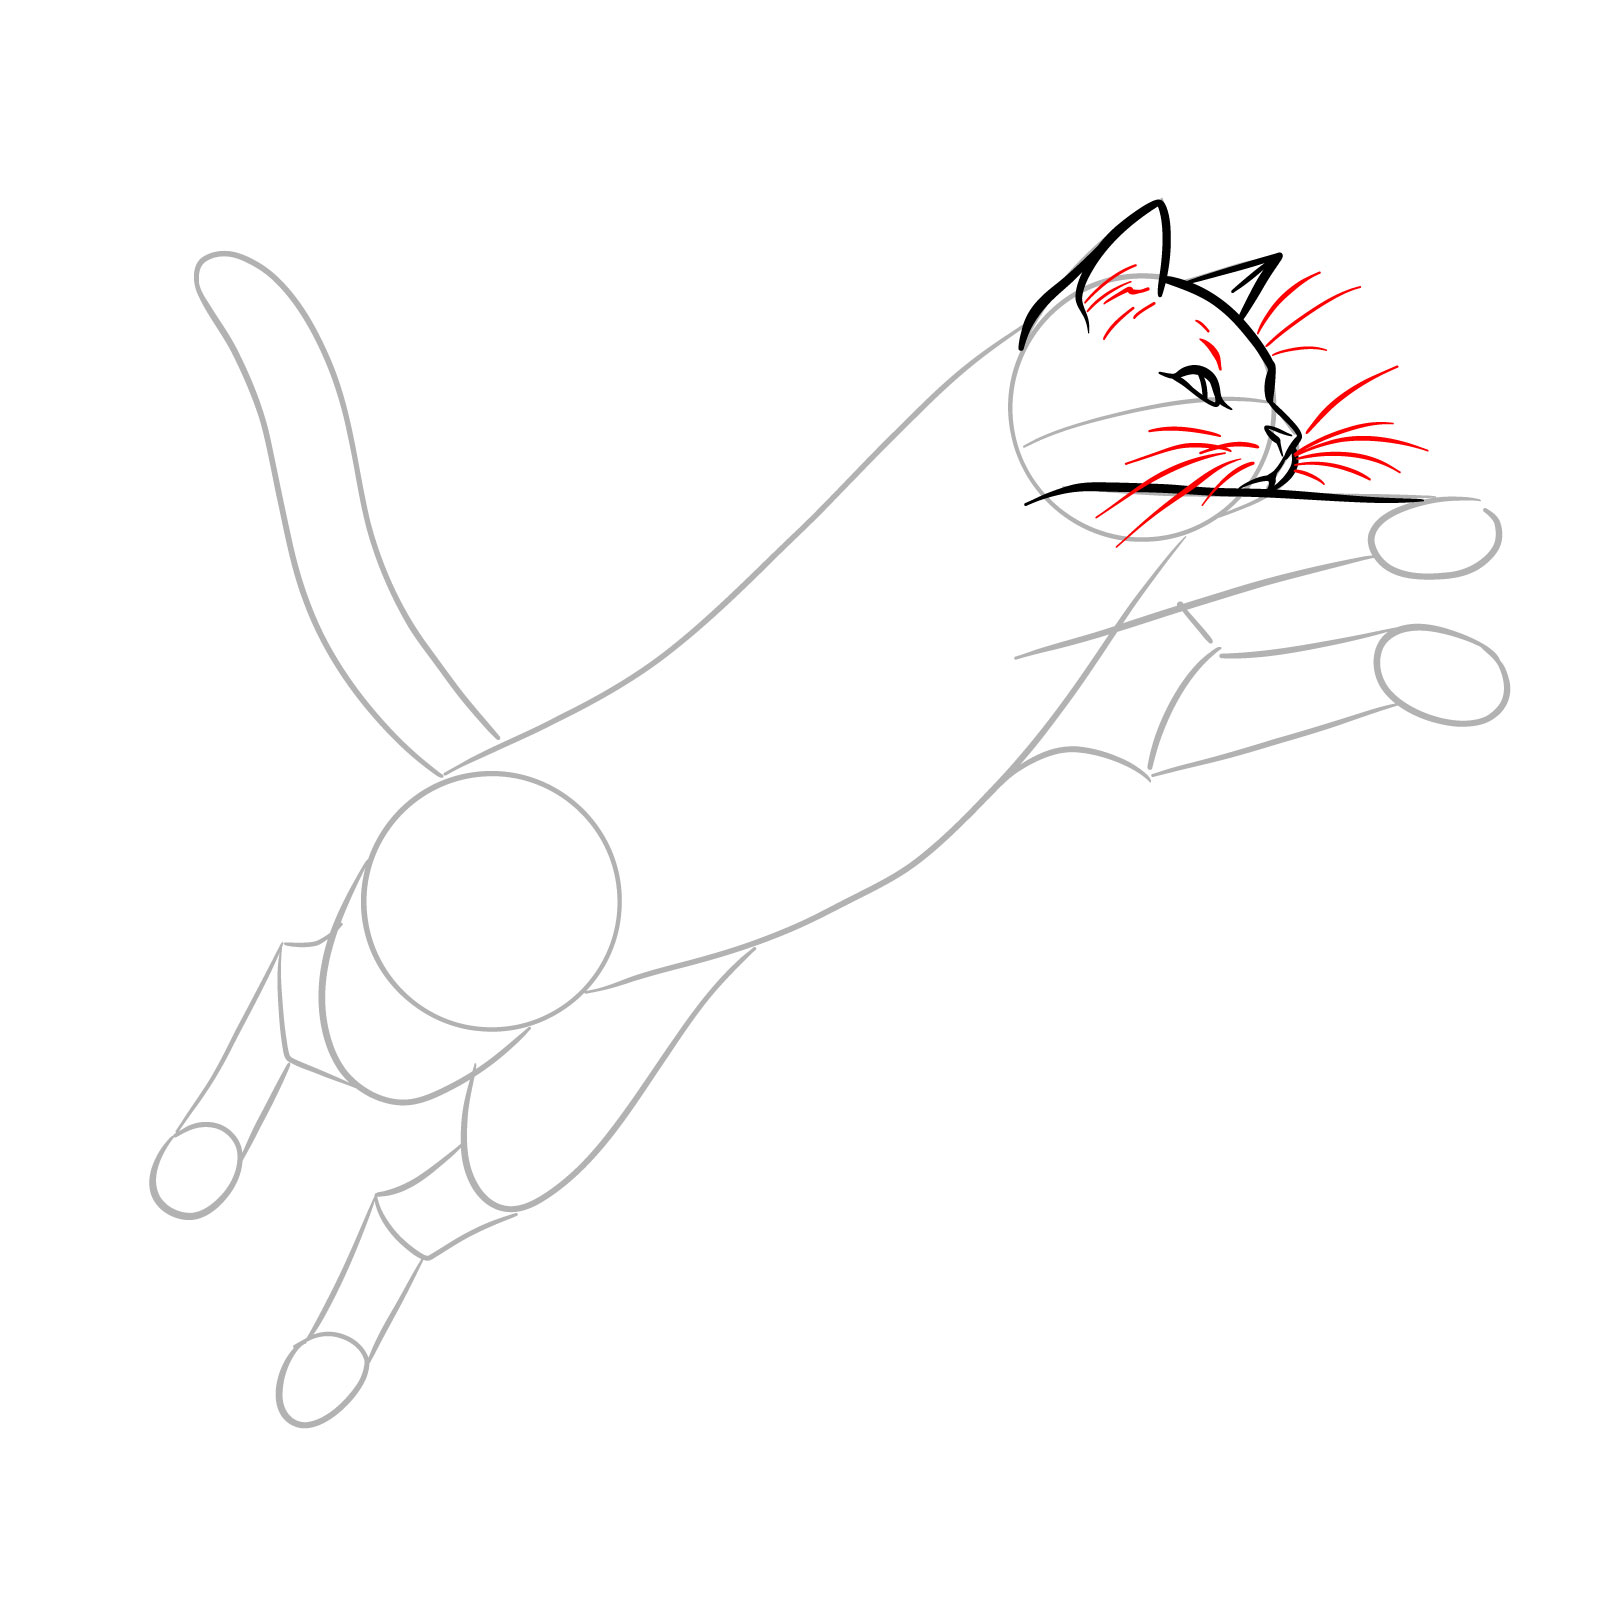 Sketch adding whiskers and fur details to the head of a cat capturing the dynamic of a jump - step 07